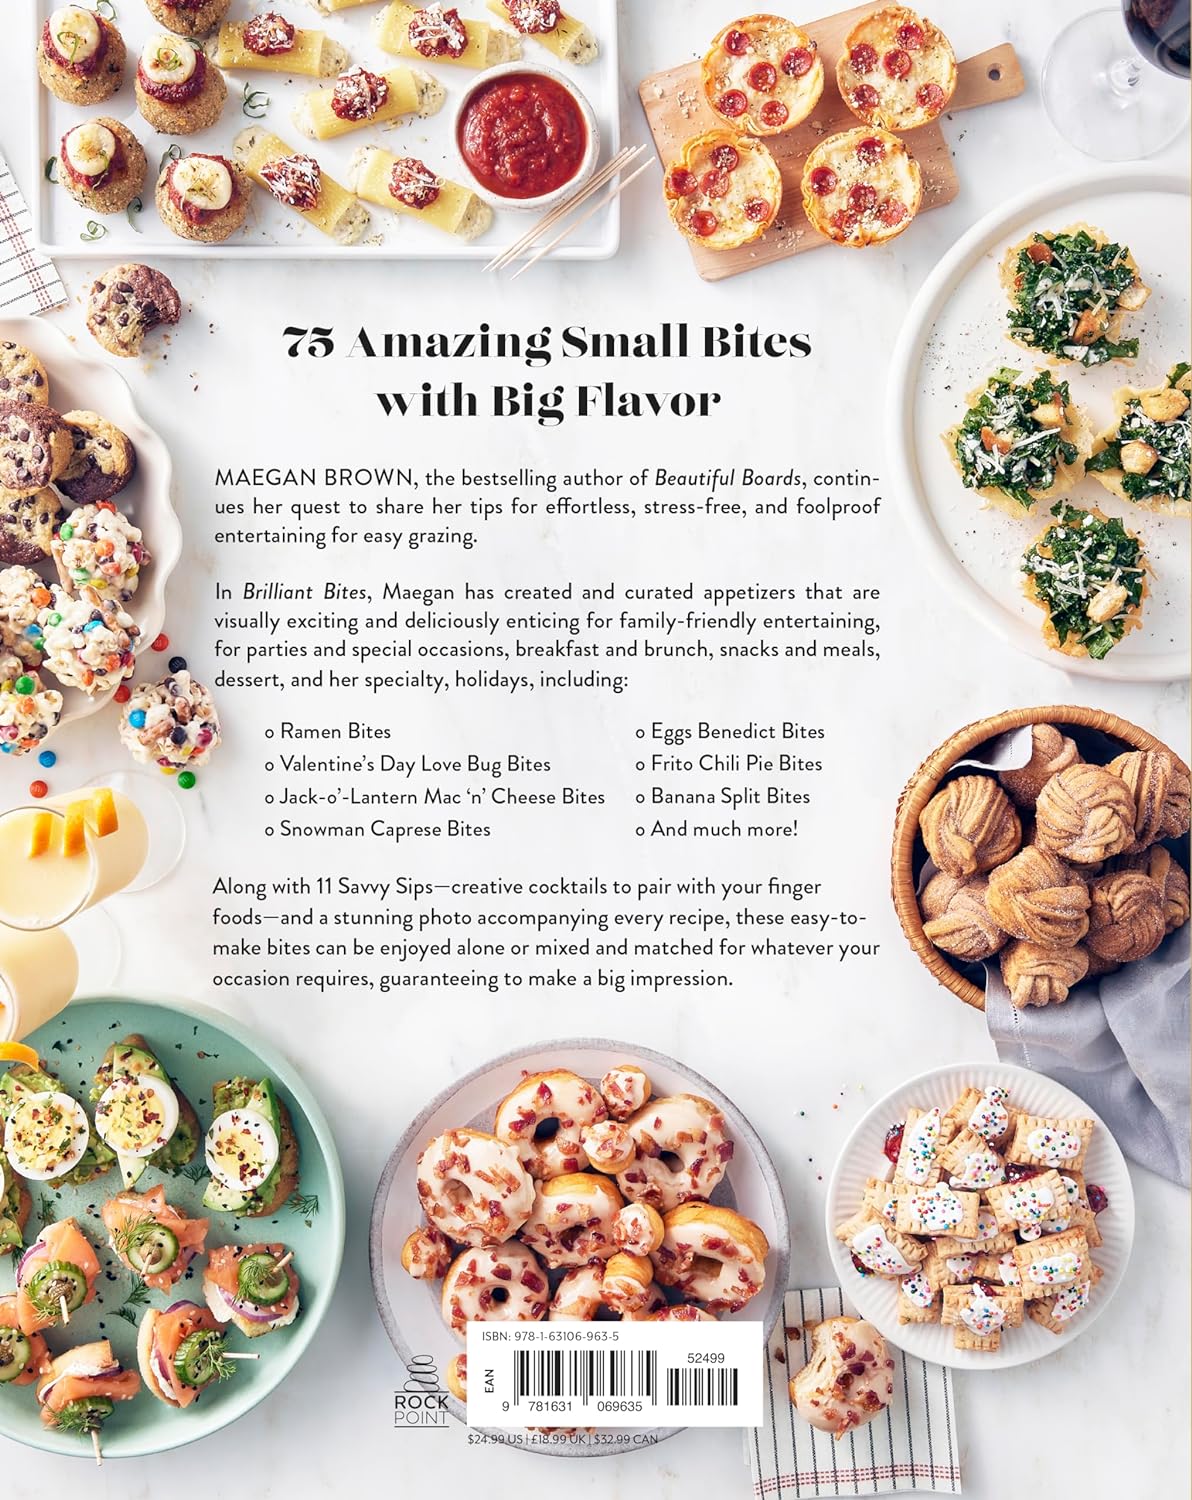 Brilliant Bites: 75 Amazing Small Bites for Any Occasion - Findlay Rowe Designs